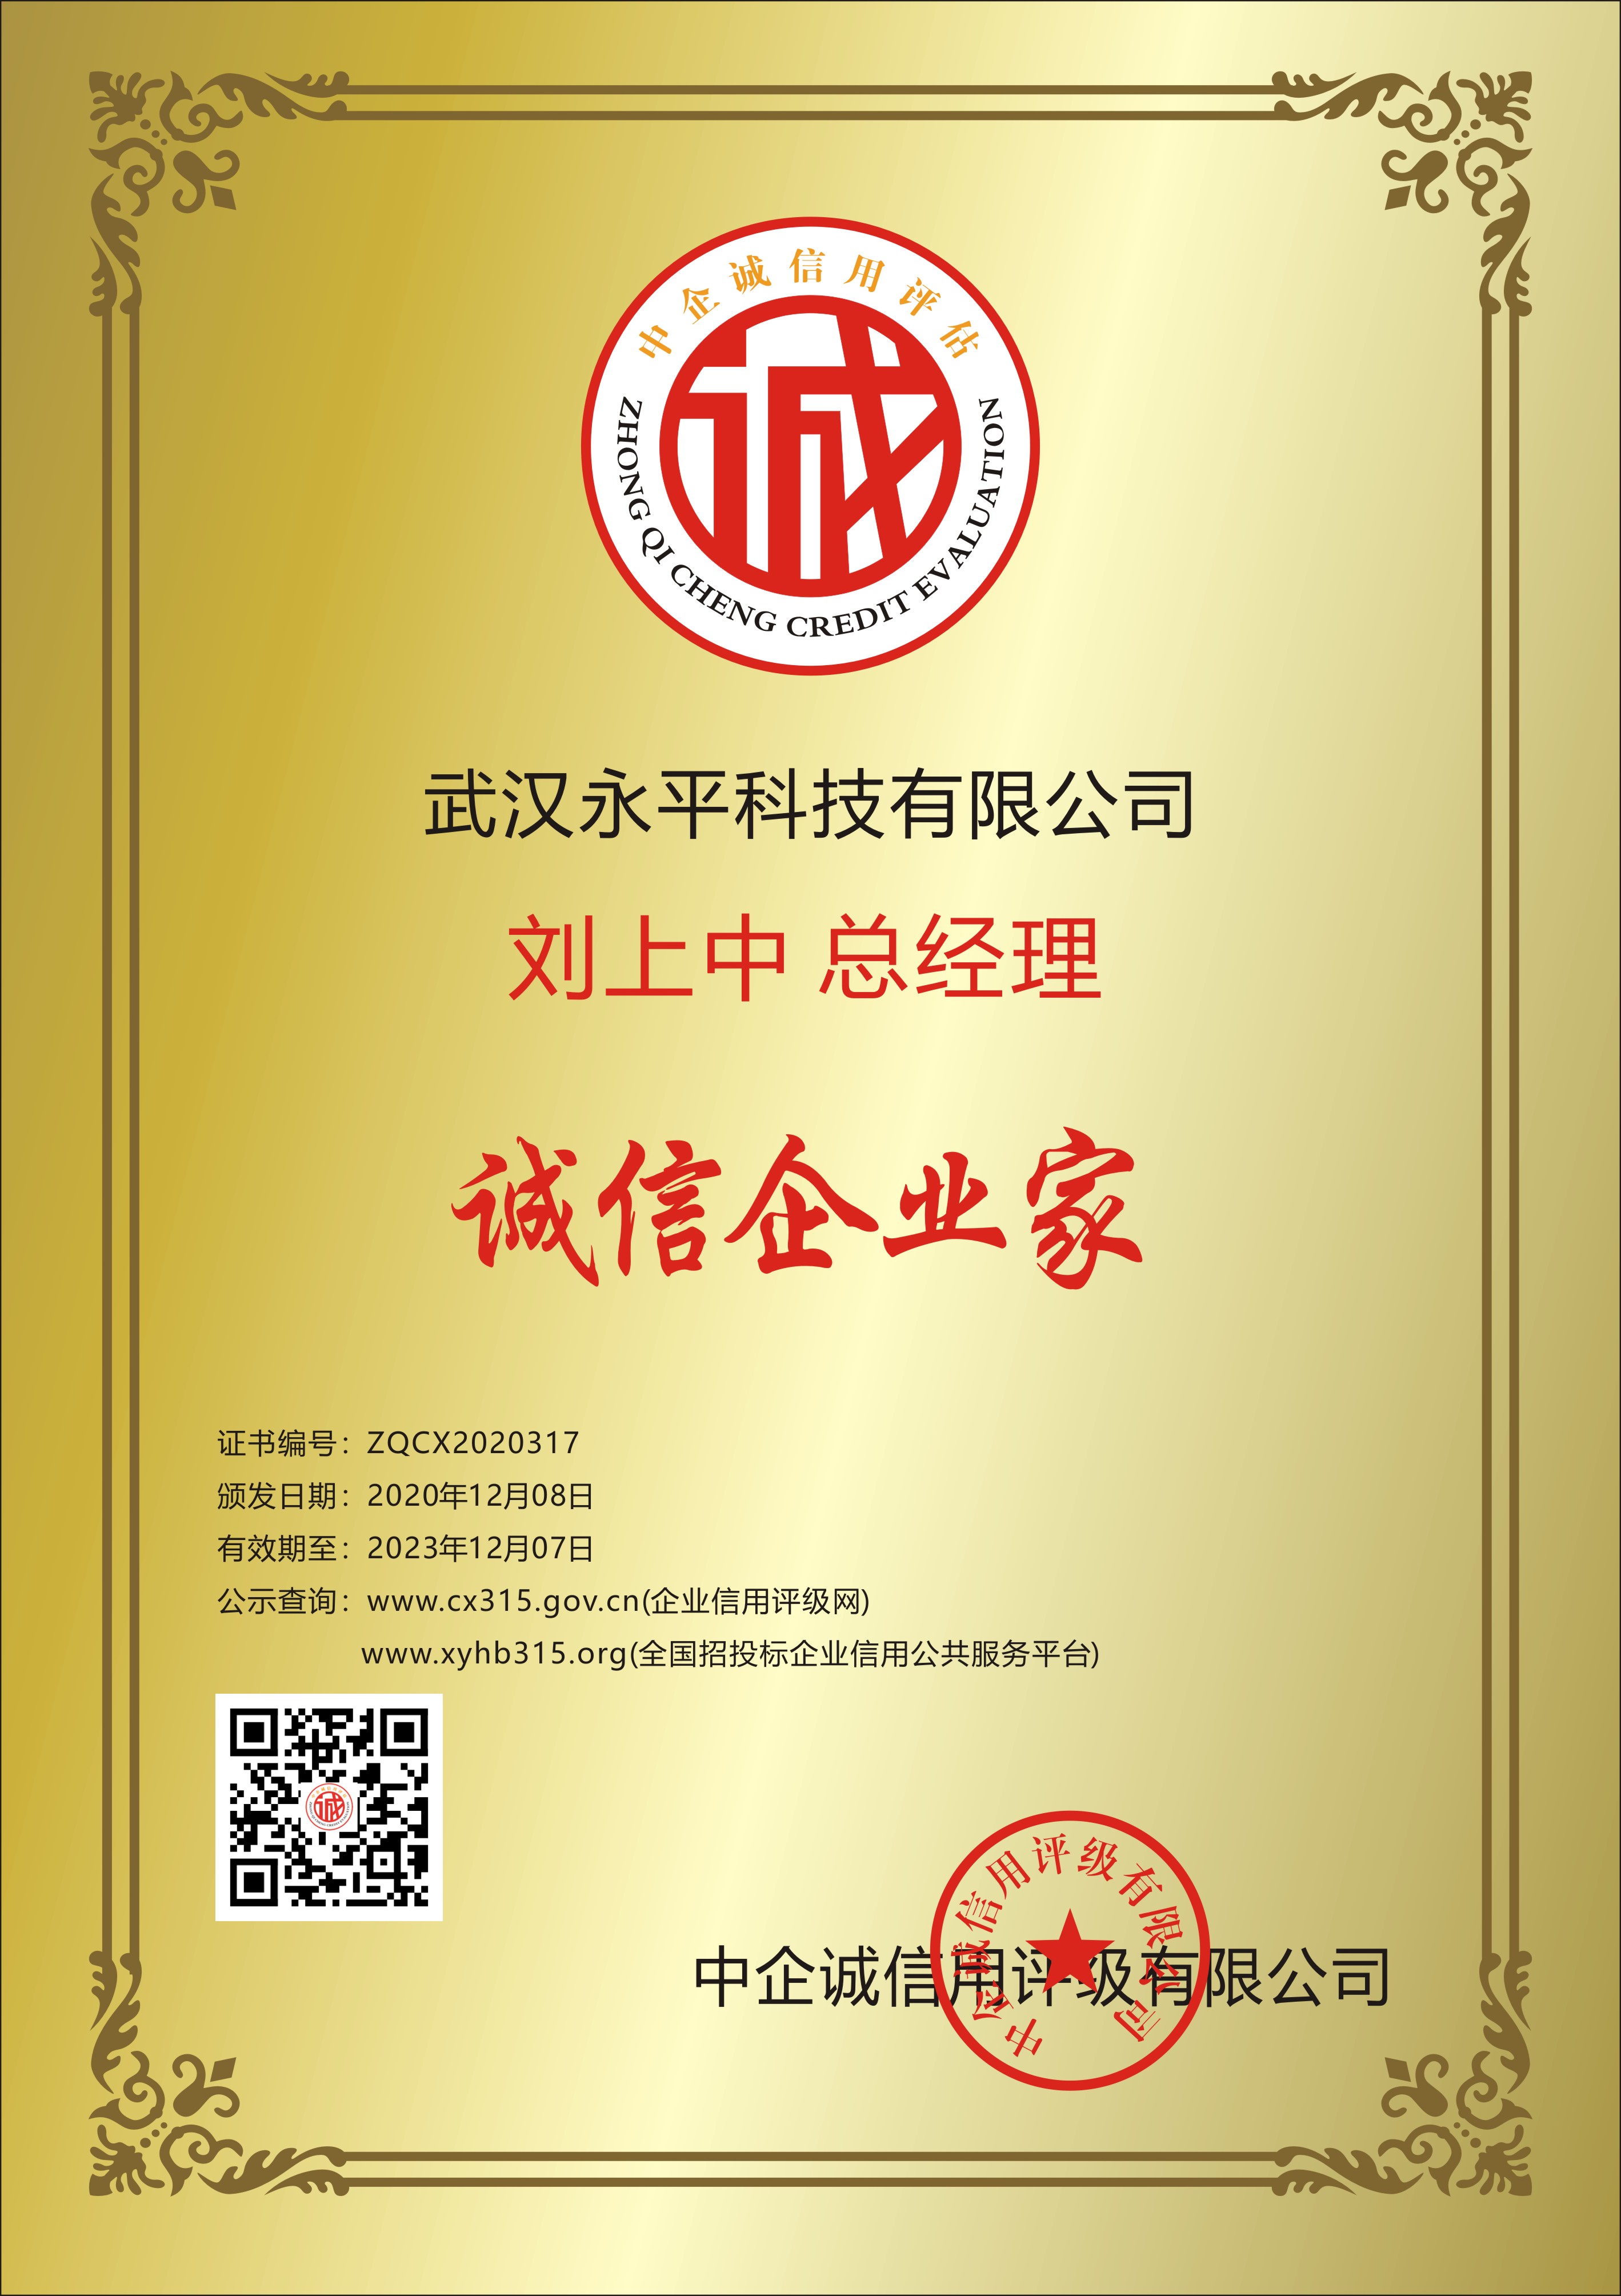 Our general manager Liu Shangzhong was awarded as an honest entrepreneur